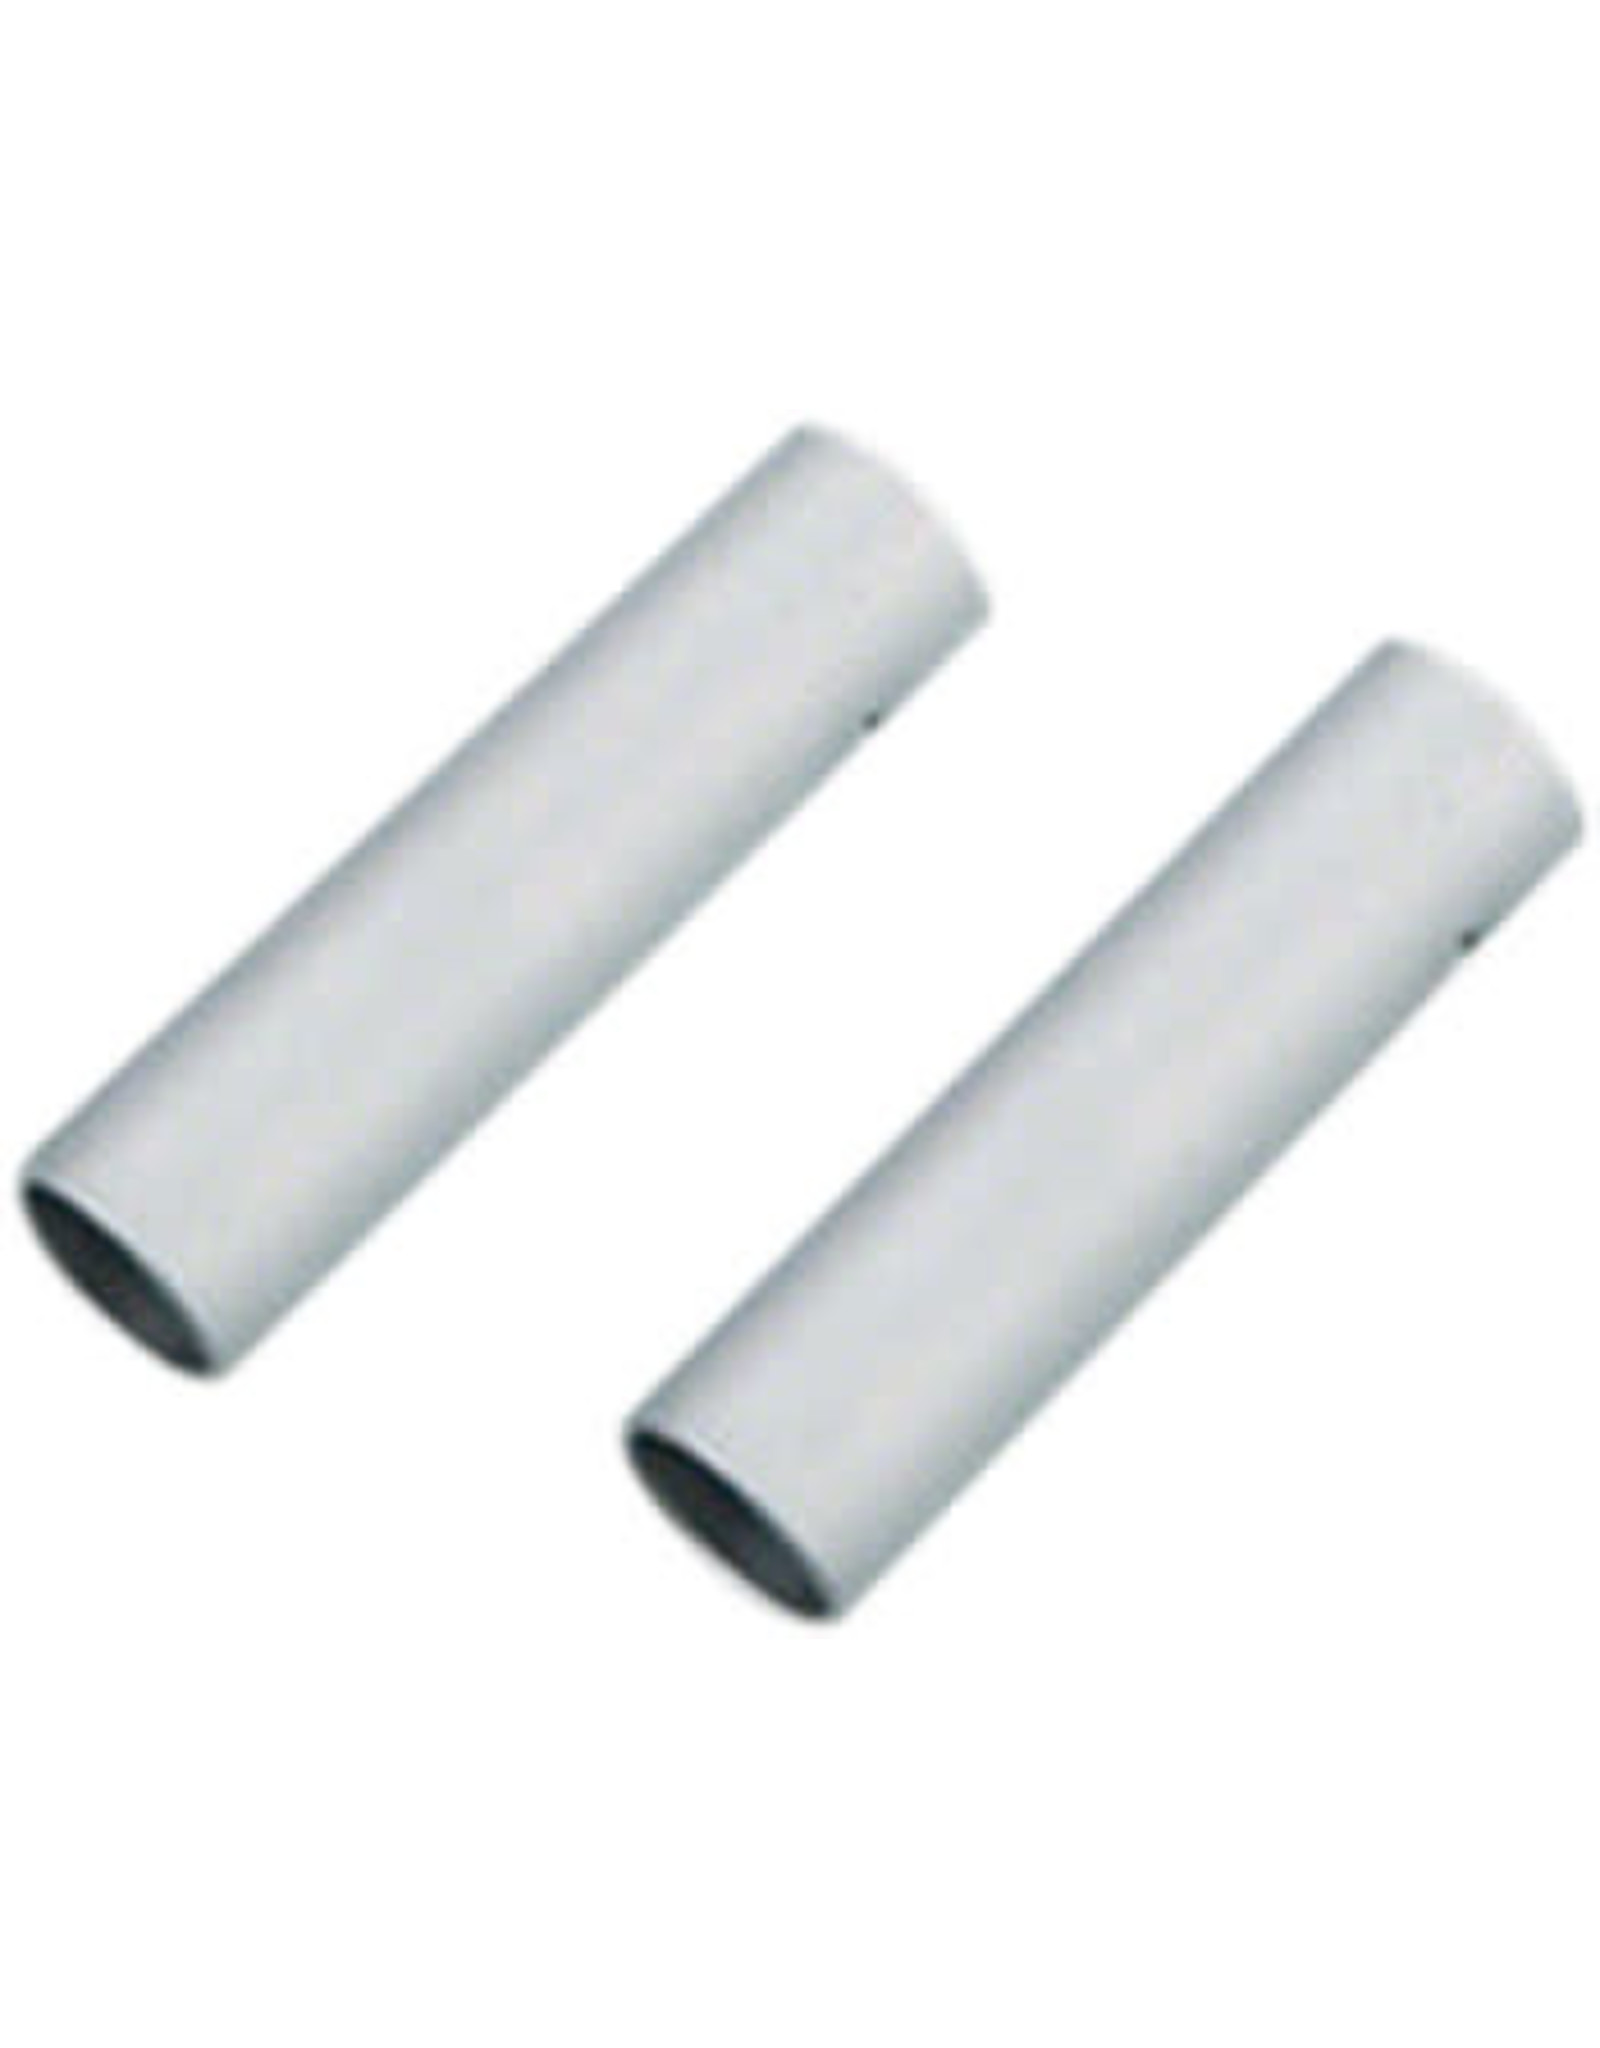 JAGWIRE Jagwire 5mm Double-Ended Connecting / Junction Ferrule, Single